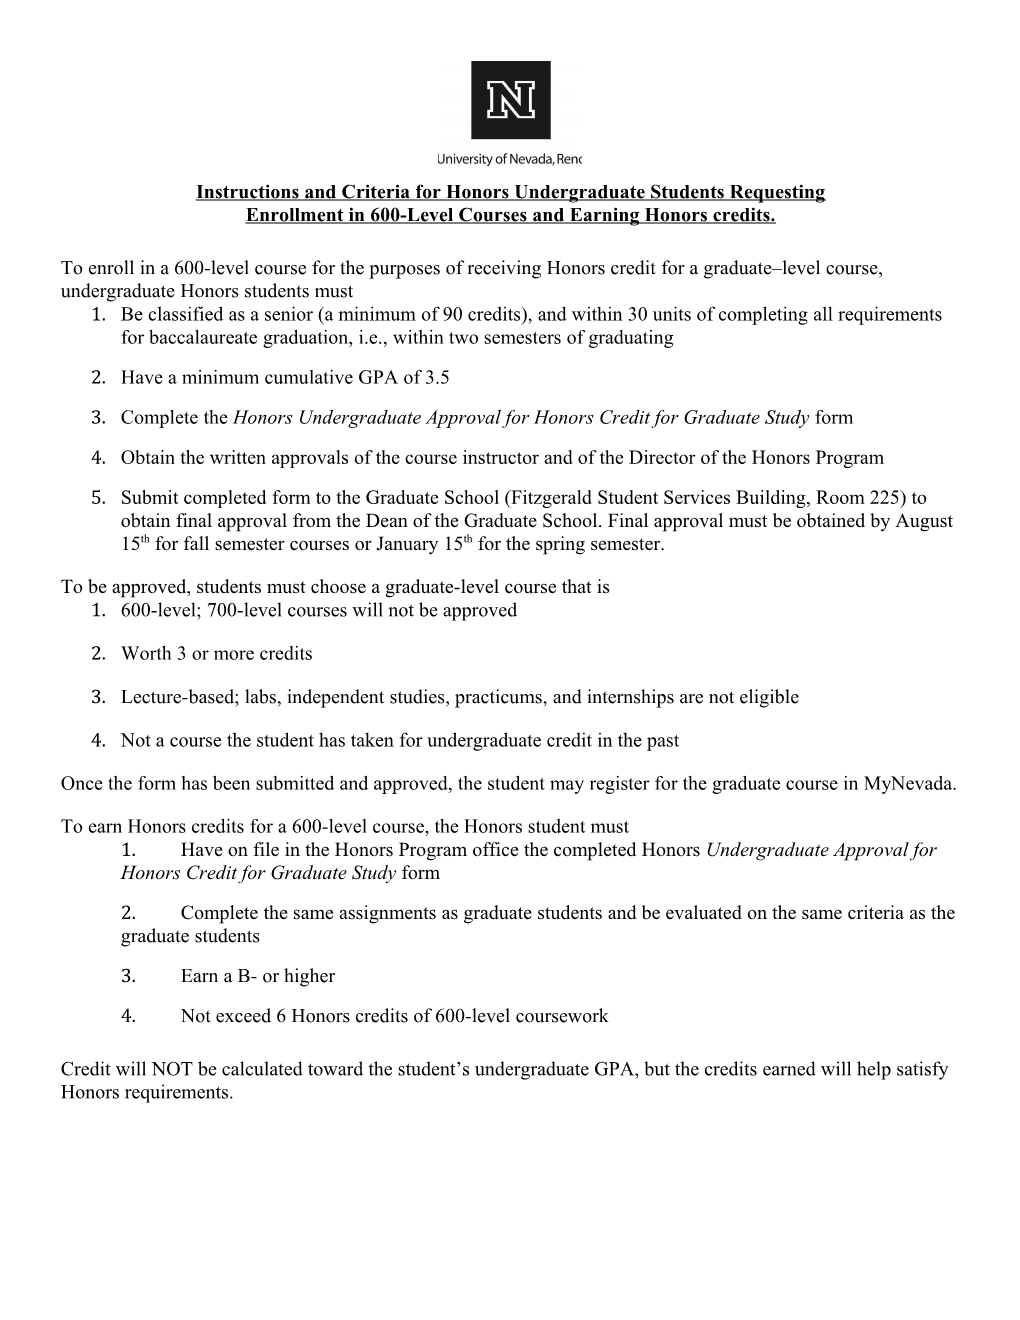 Instructions and Criteria for Honors Undergraduate Students Requesting Enrollment in 600-Level